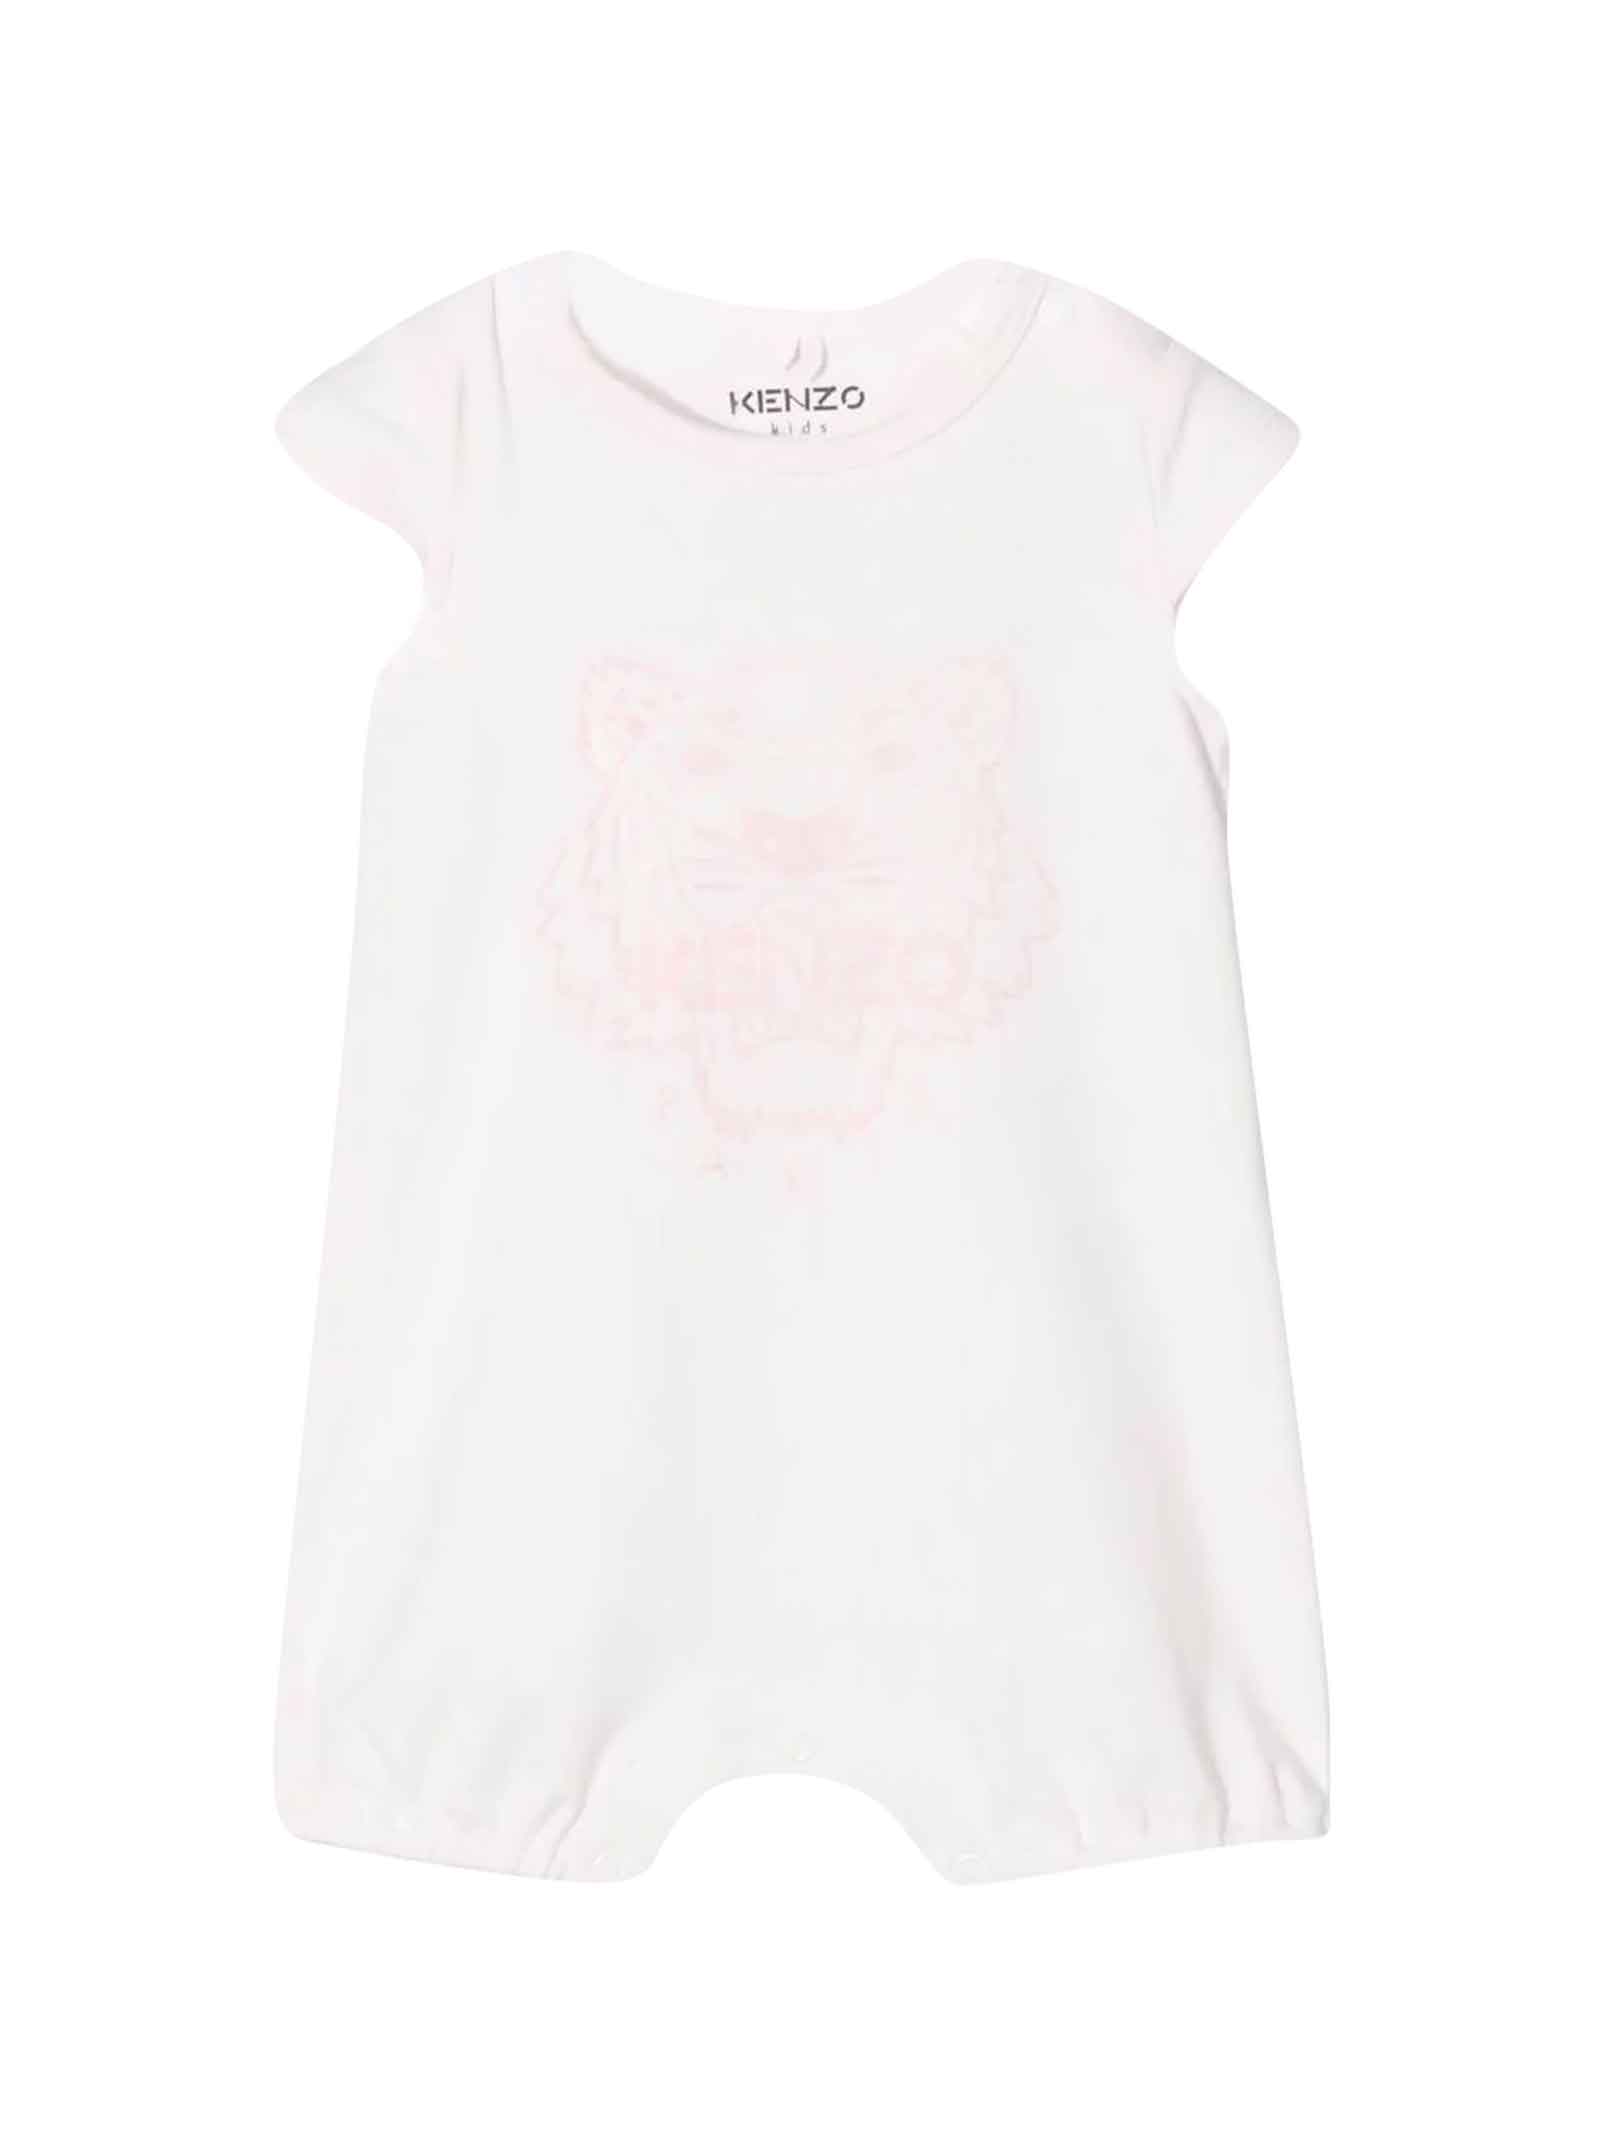 Kenzo Kids Short White Baby Girl Romper With Pink Tiger Print On The Front By